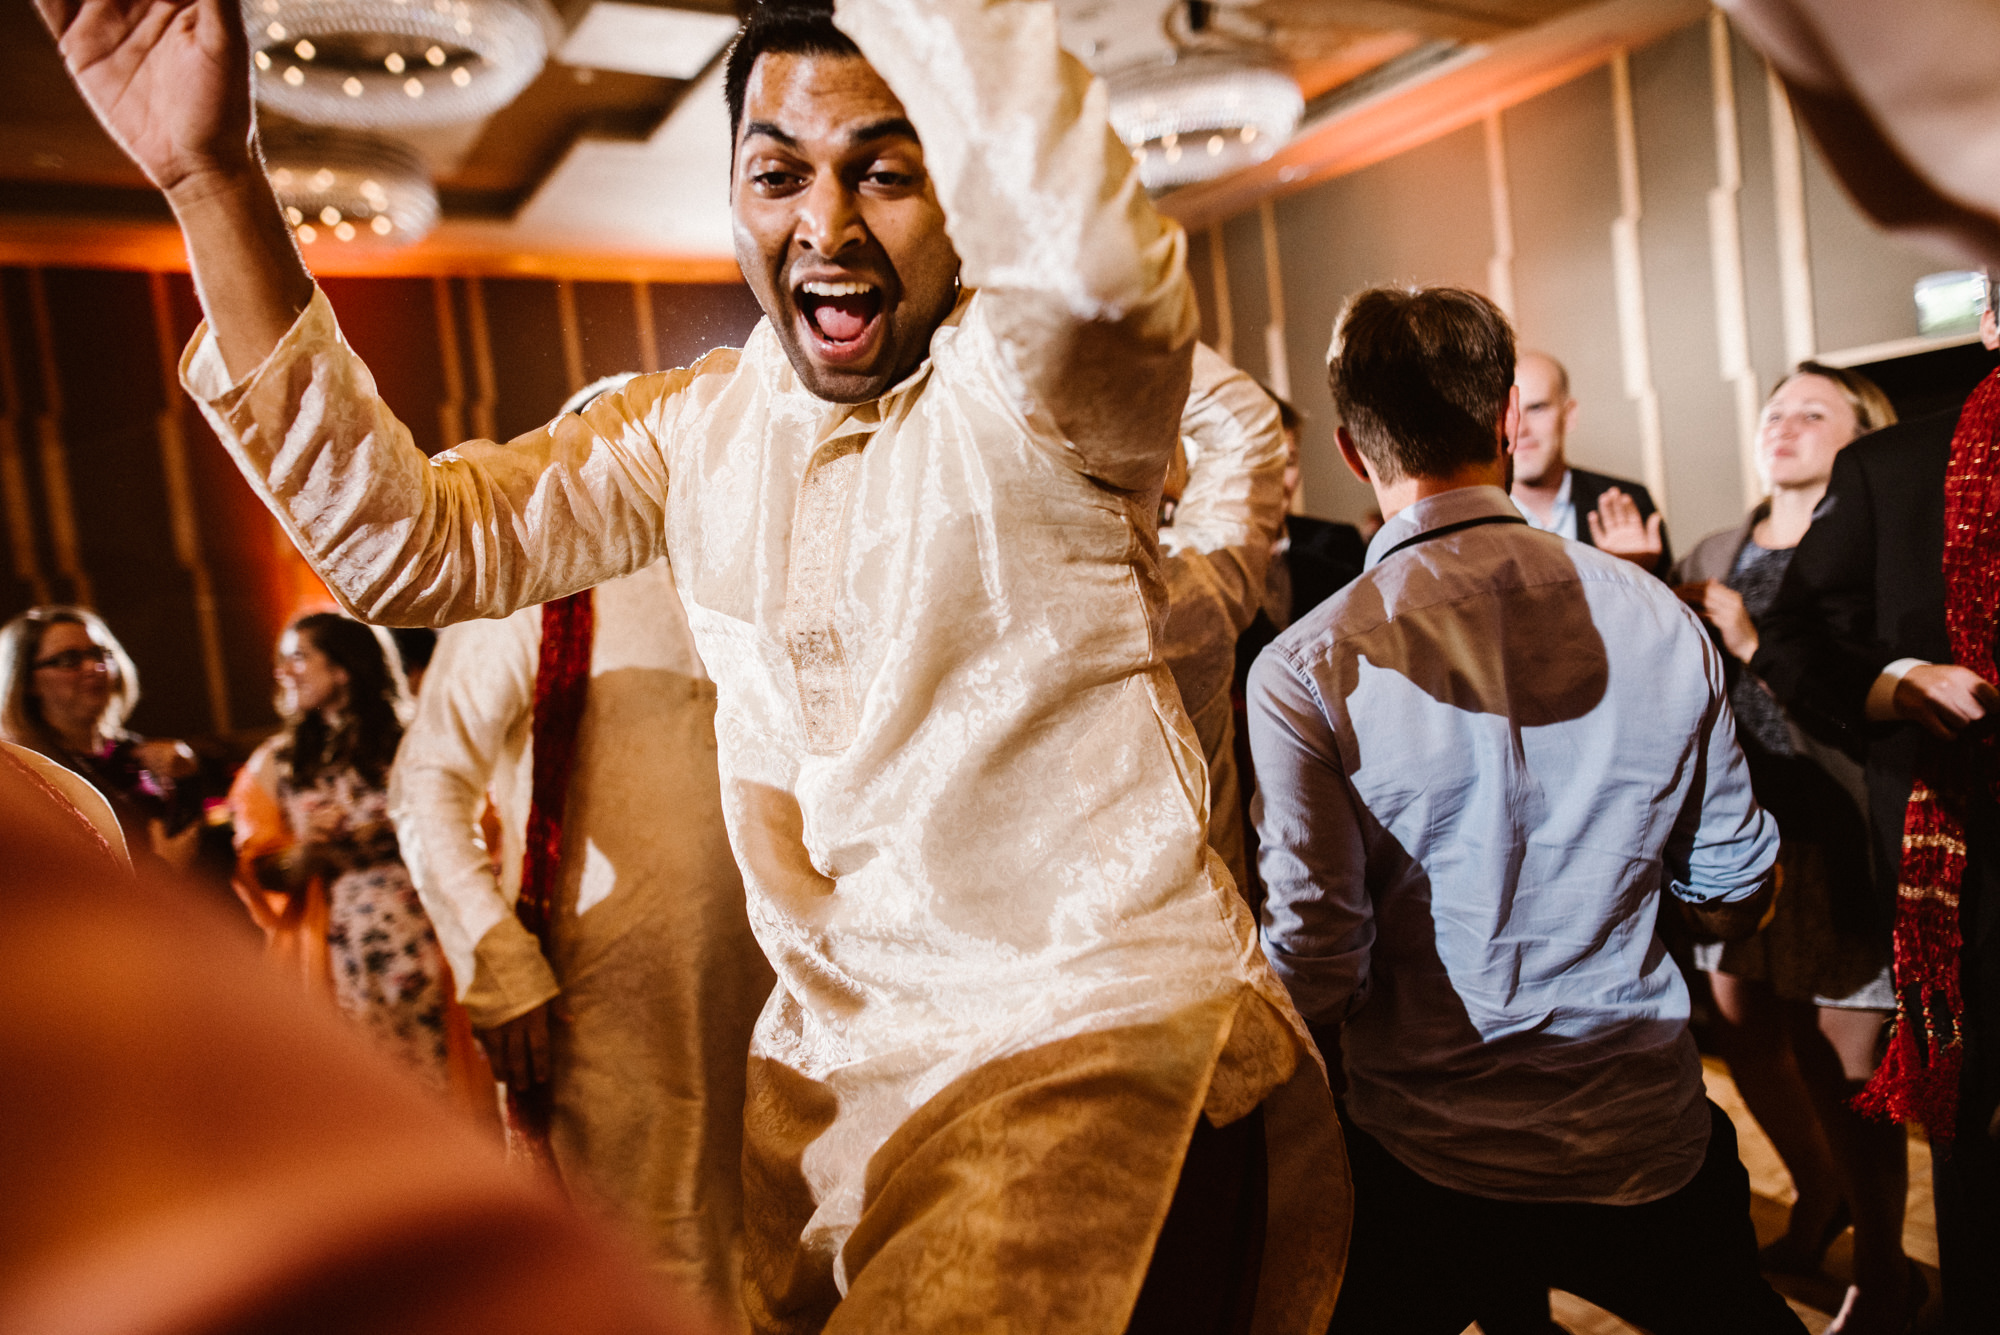 Julie and Neel's vibrant, festive wedding reception at the Four Seasons Seattle.